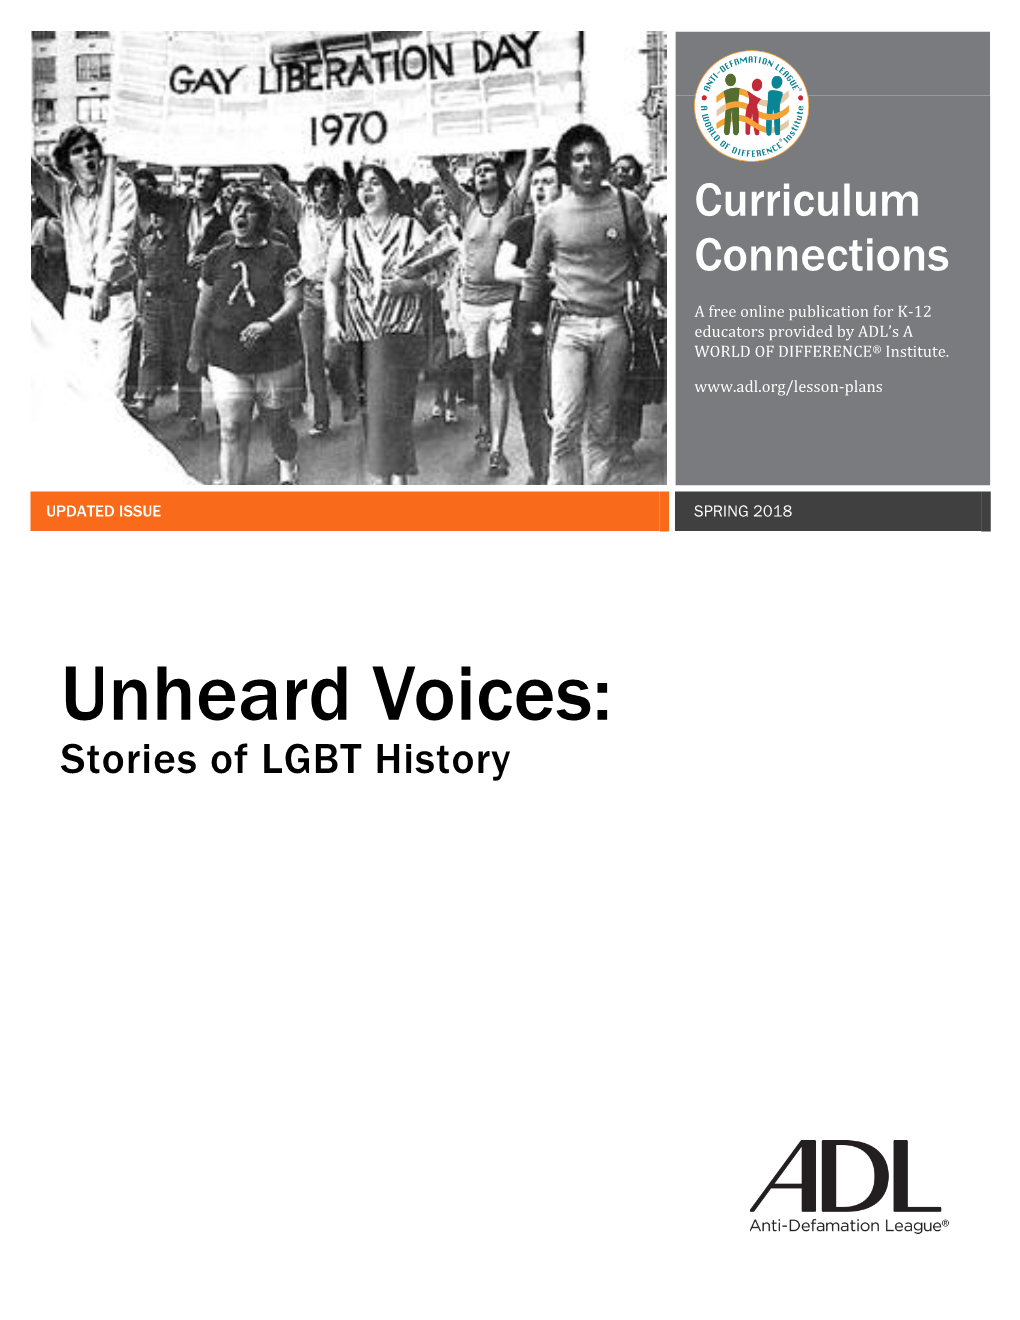 Unheard Voices: Stories of LGBT History